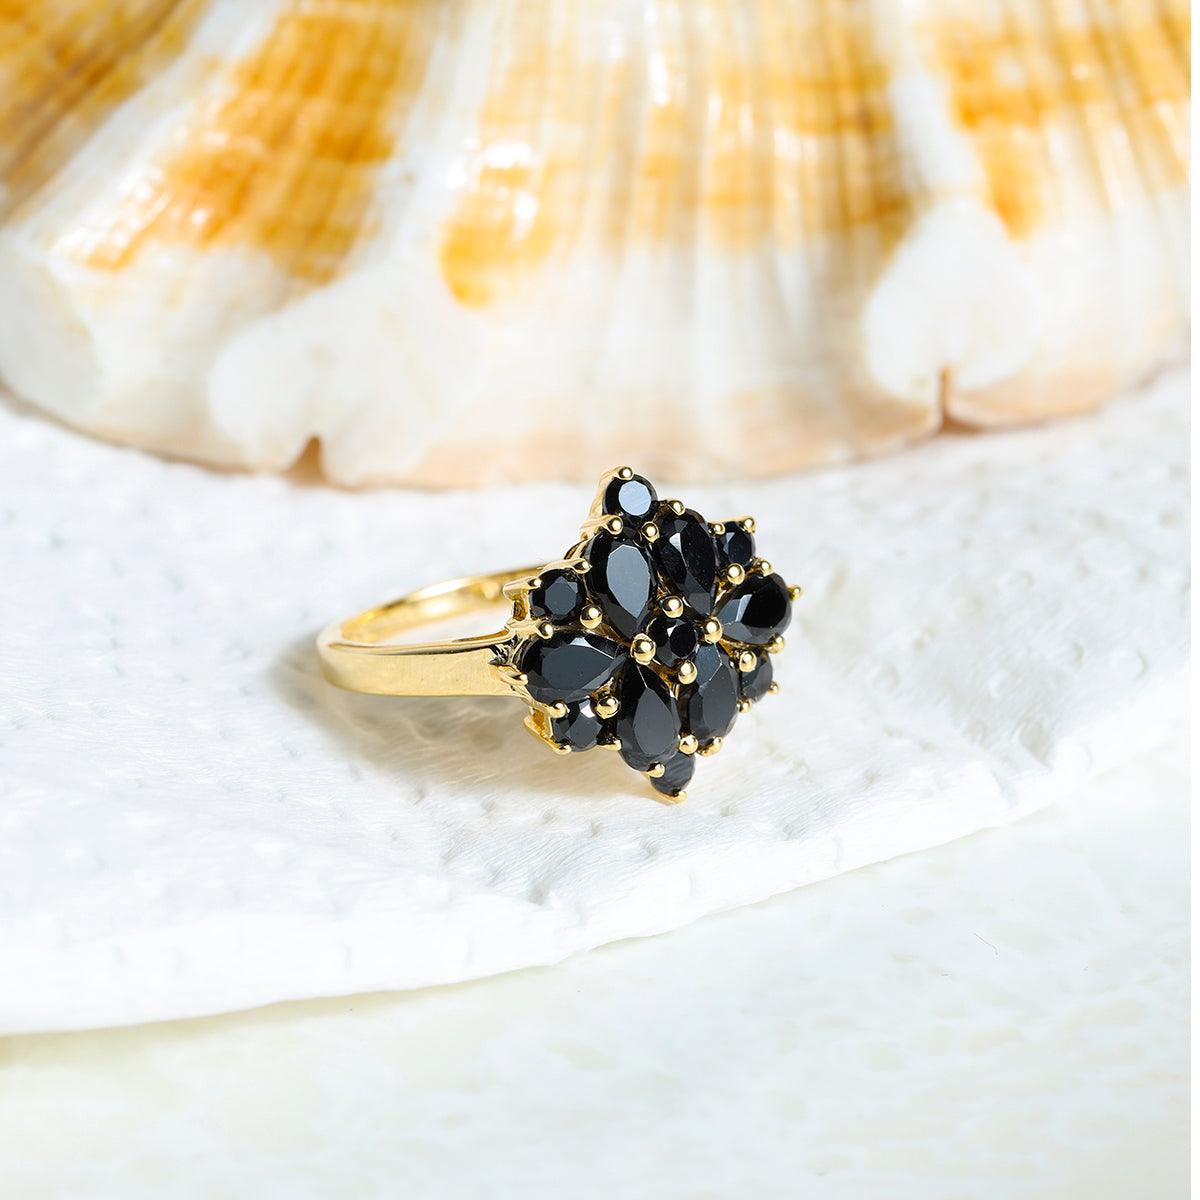 Black Onyx Cluster Ring 14k Gold Over 925 Silver - YoTreasure